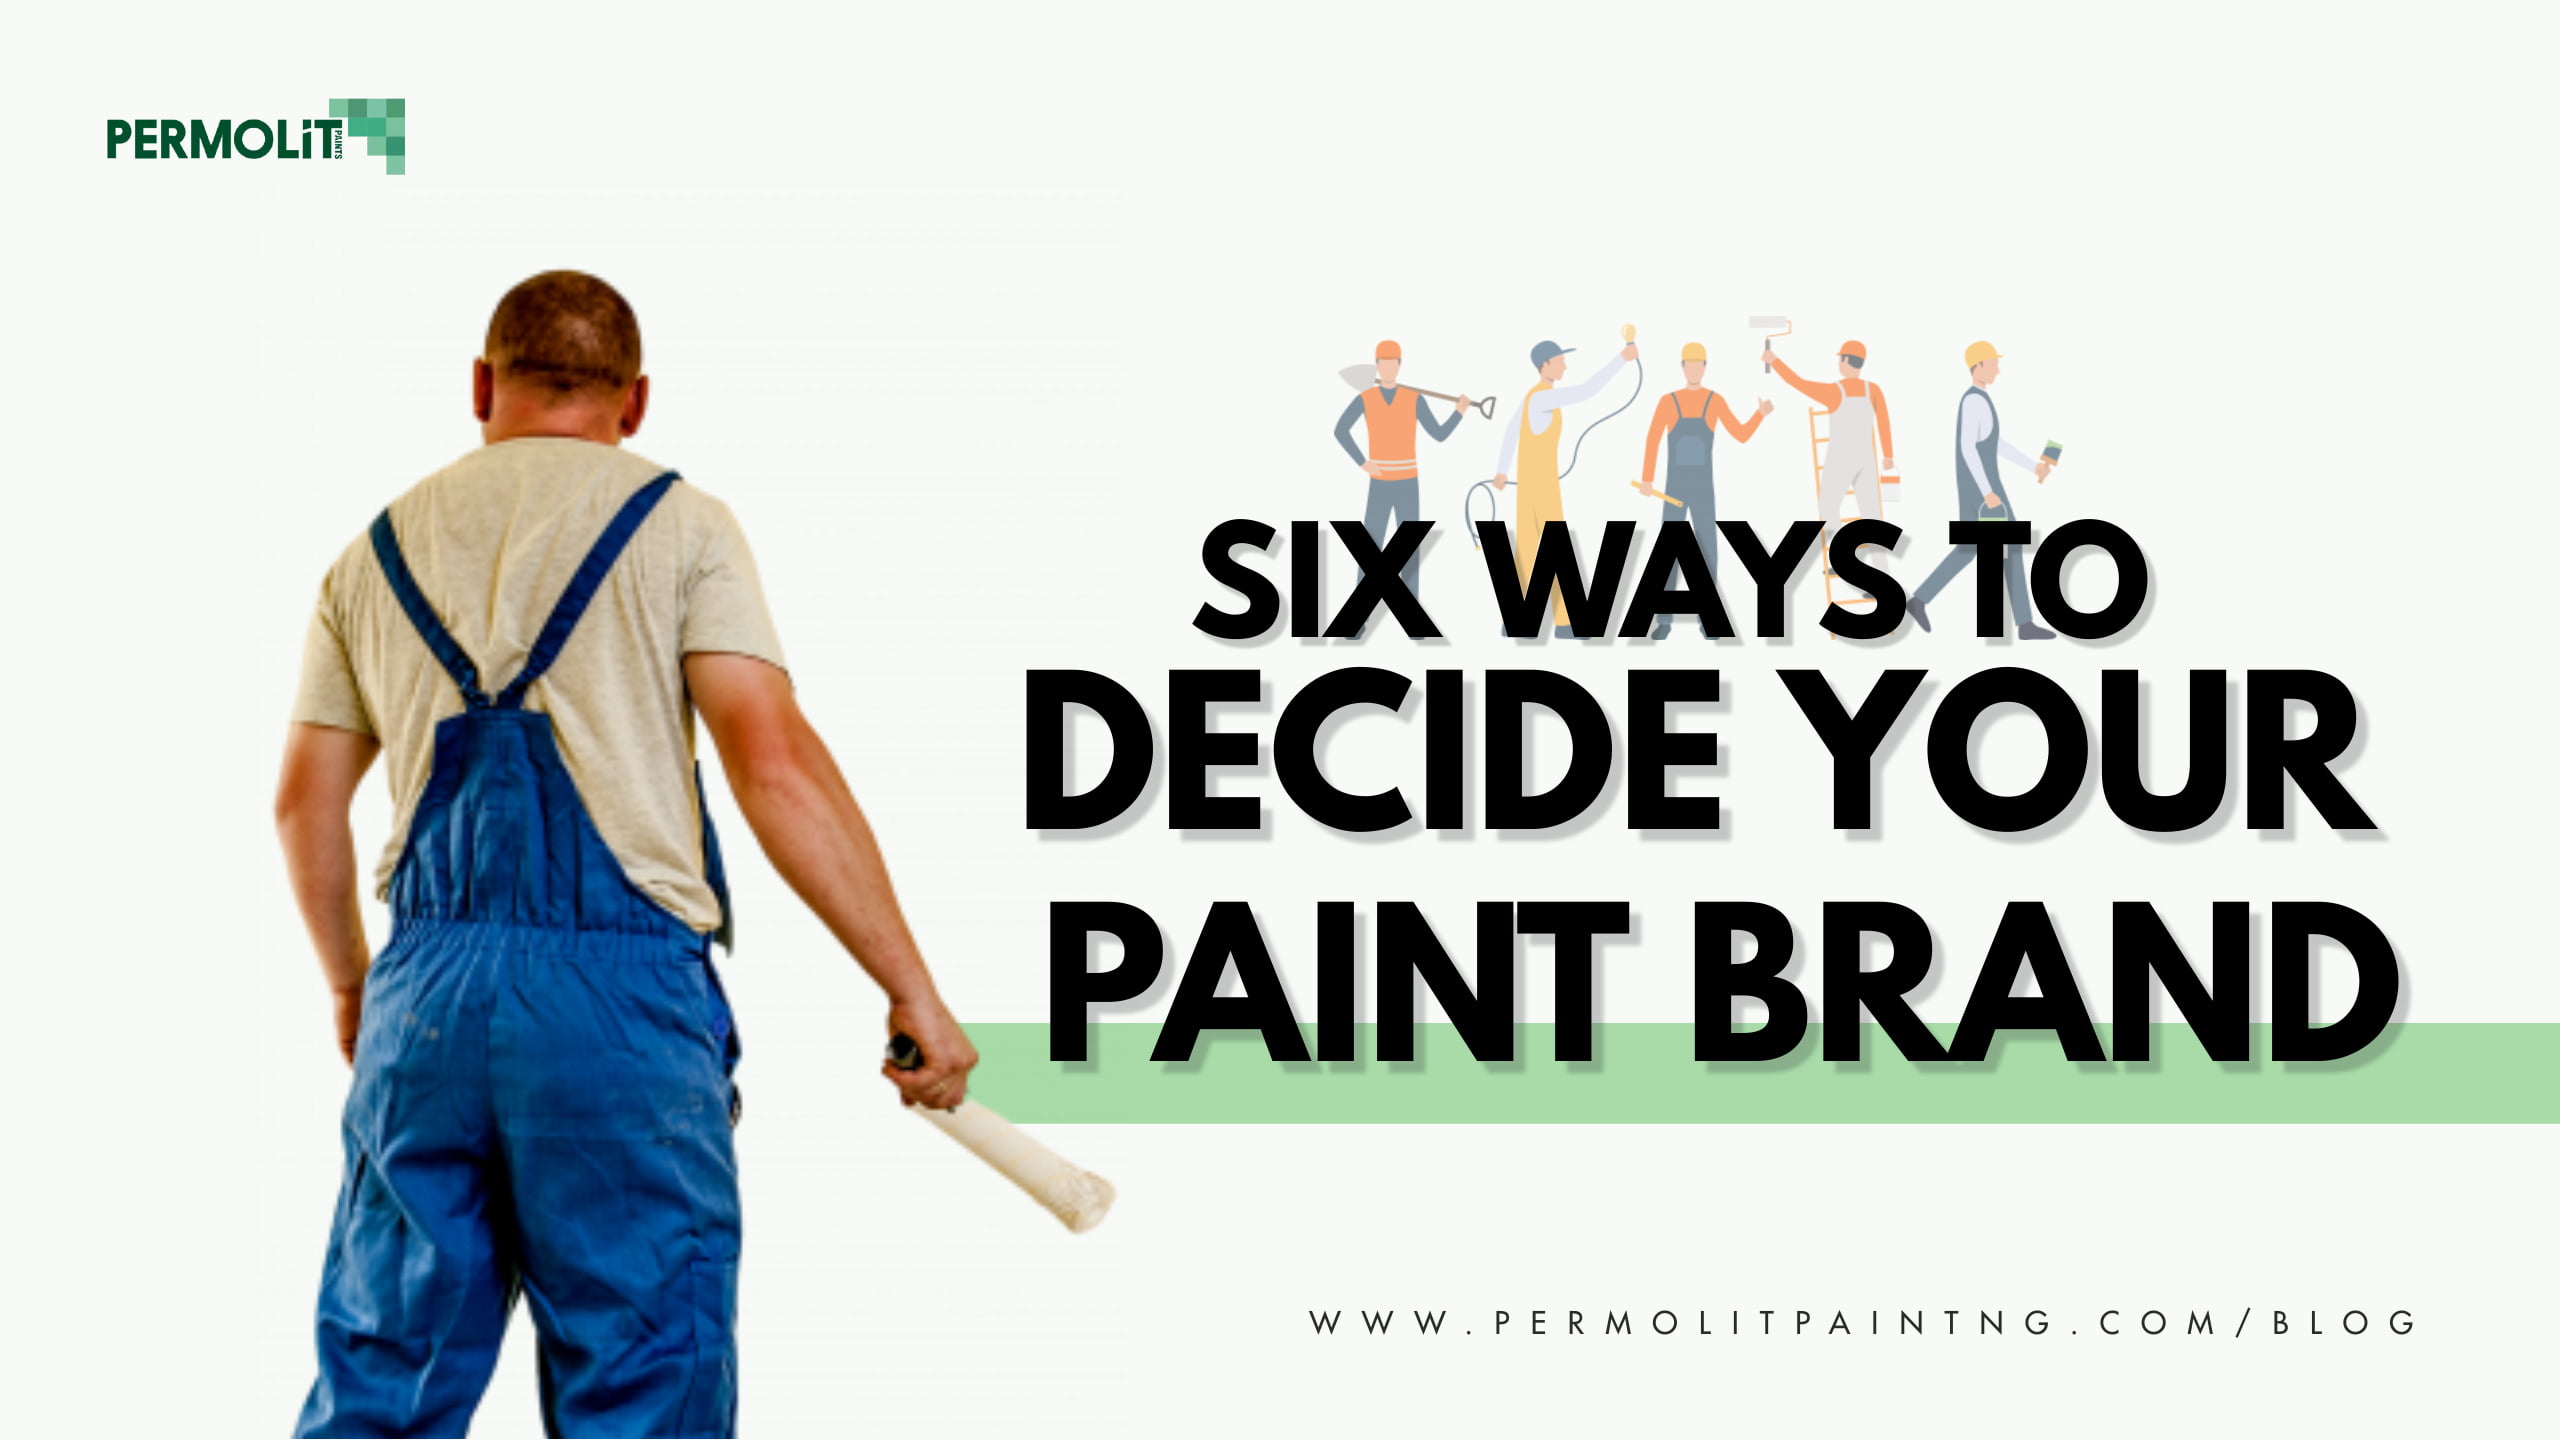 6 Ways To Decide Your Paint Brand